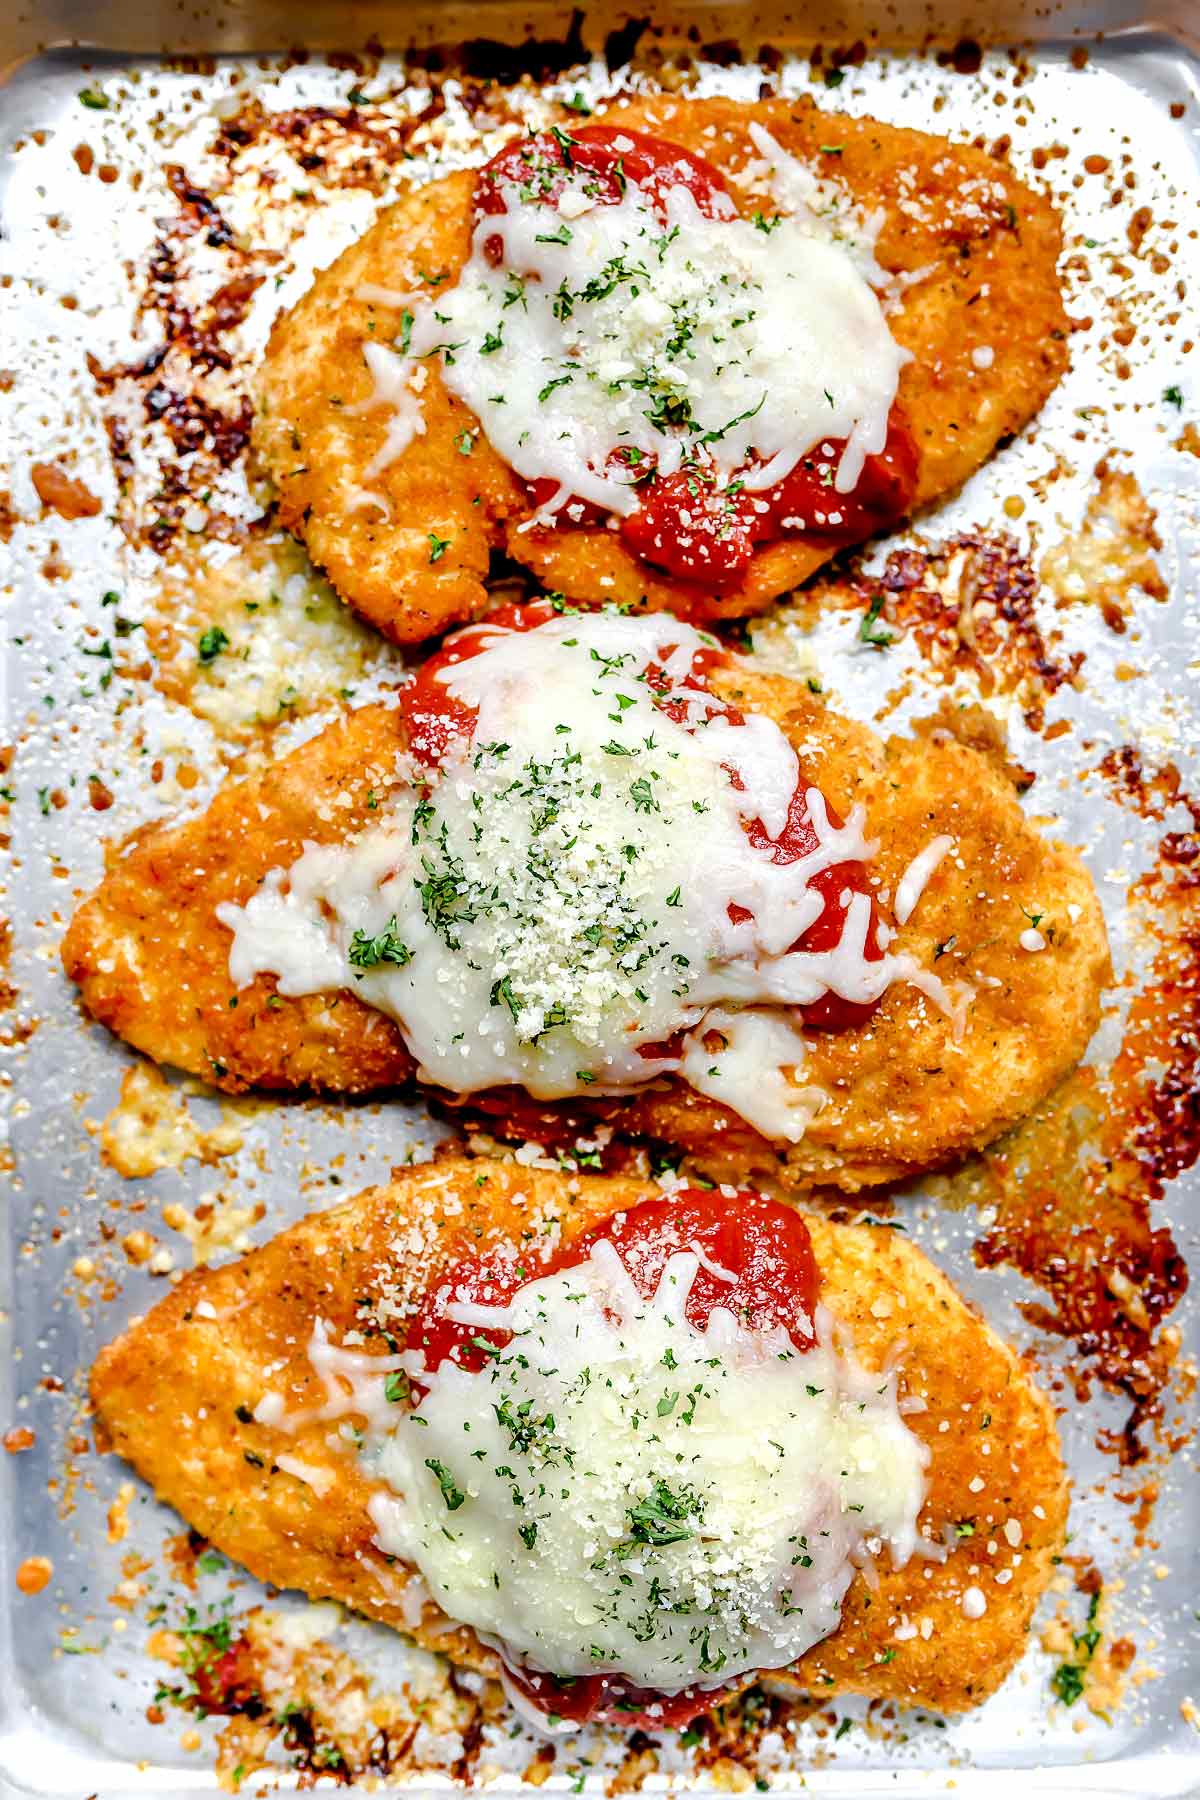 Baked Chicken Parmesan from foodiecrush.com on foodiecrush.com